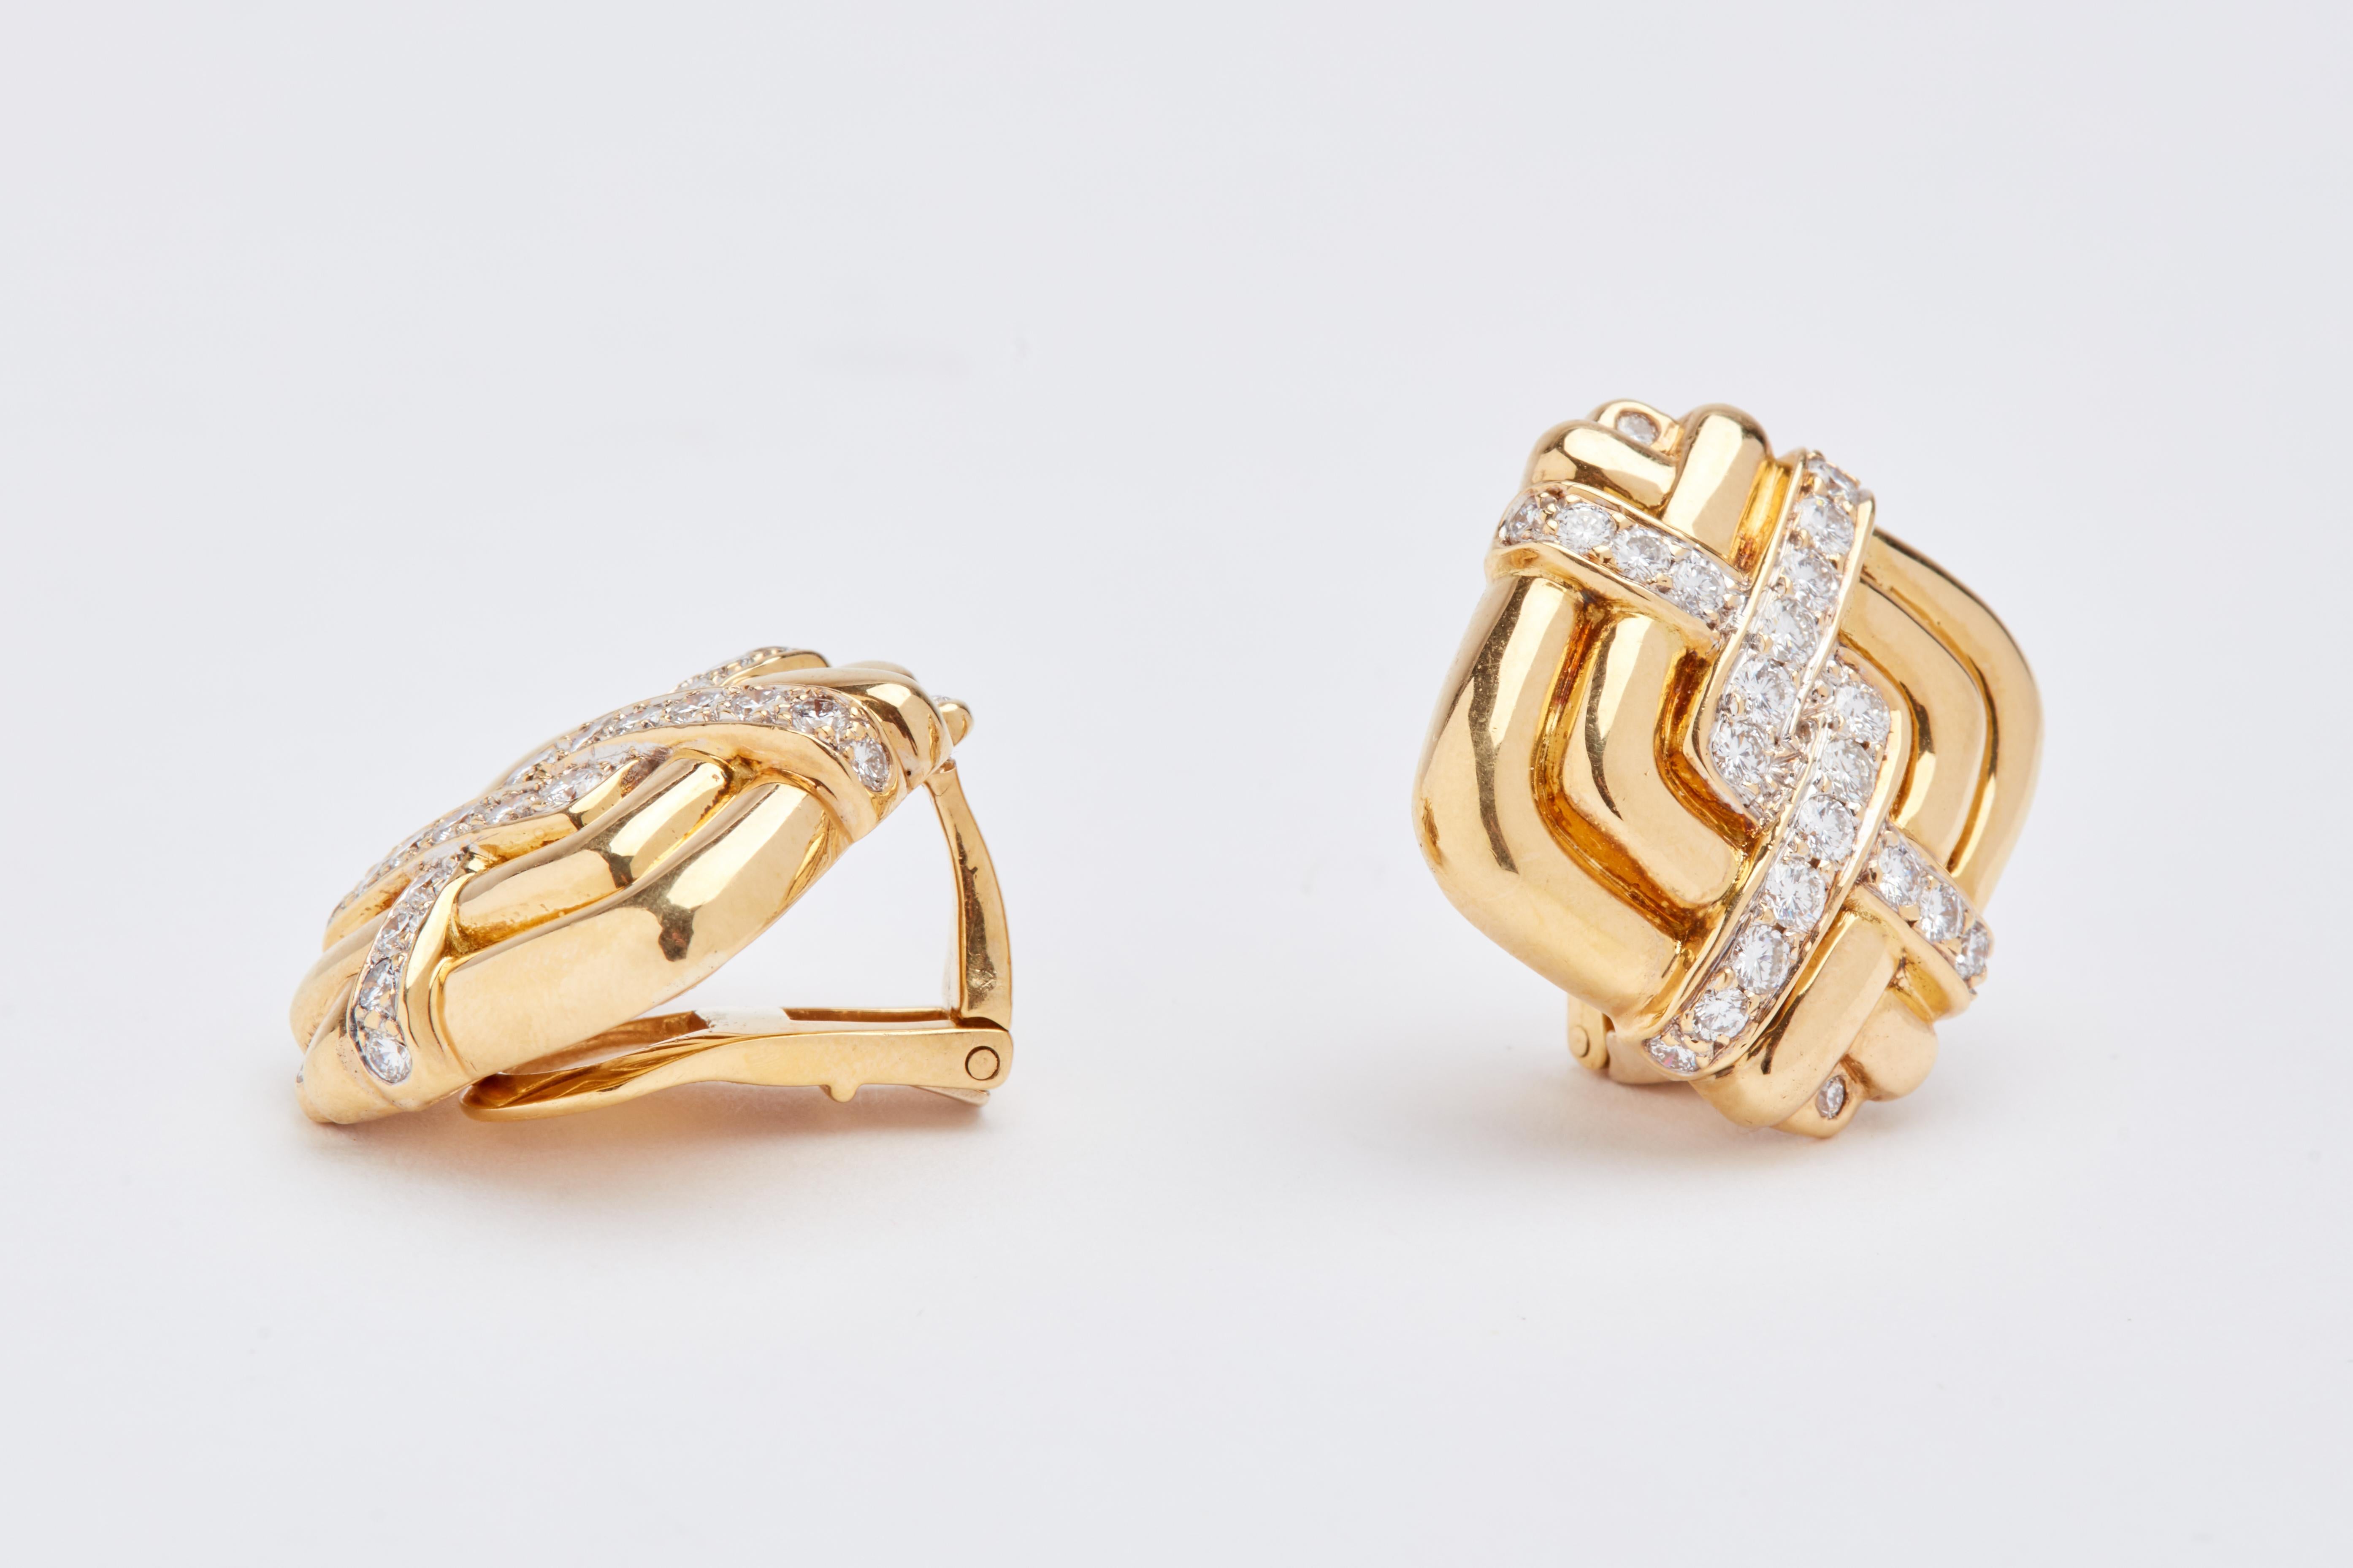 18k yellow gold and diamond ear clips. aprox 2 carats total of round white diamonds. 1 inch sqare. 